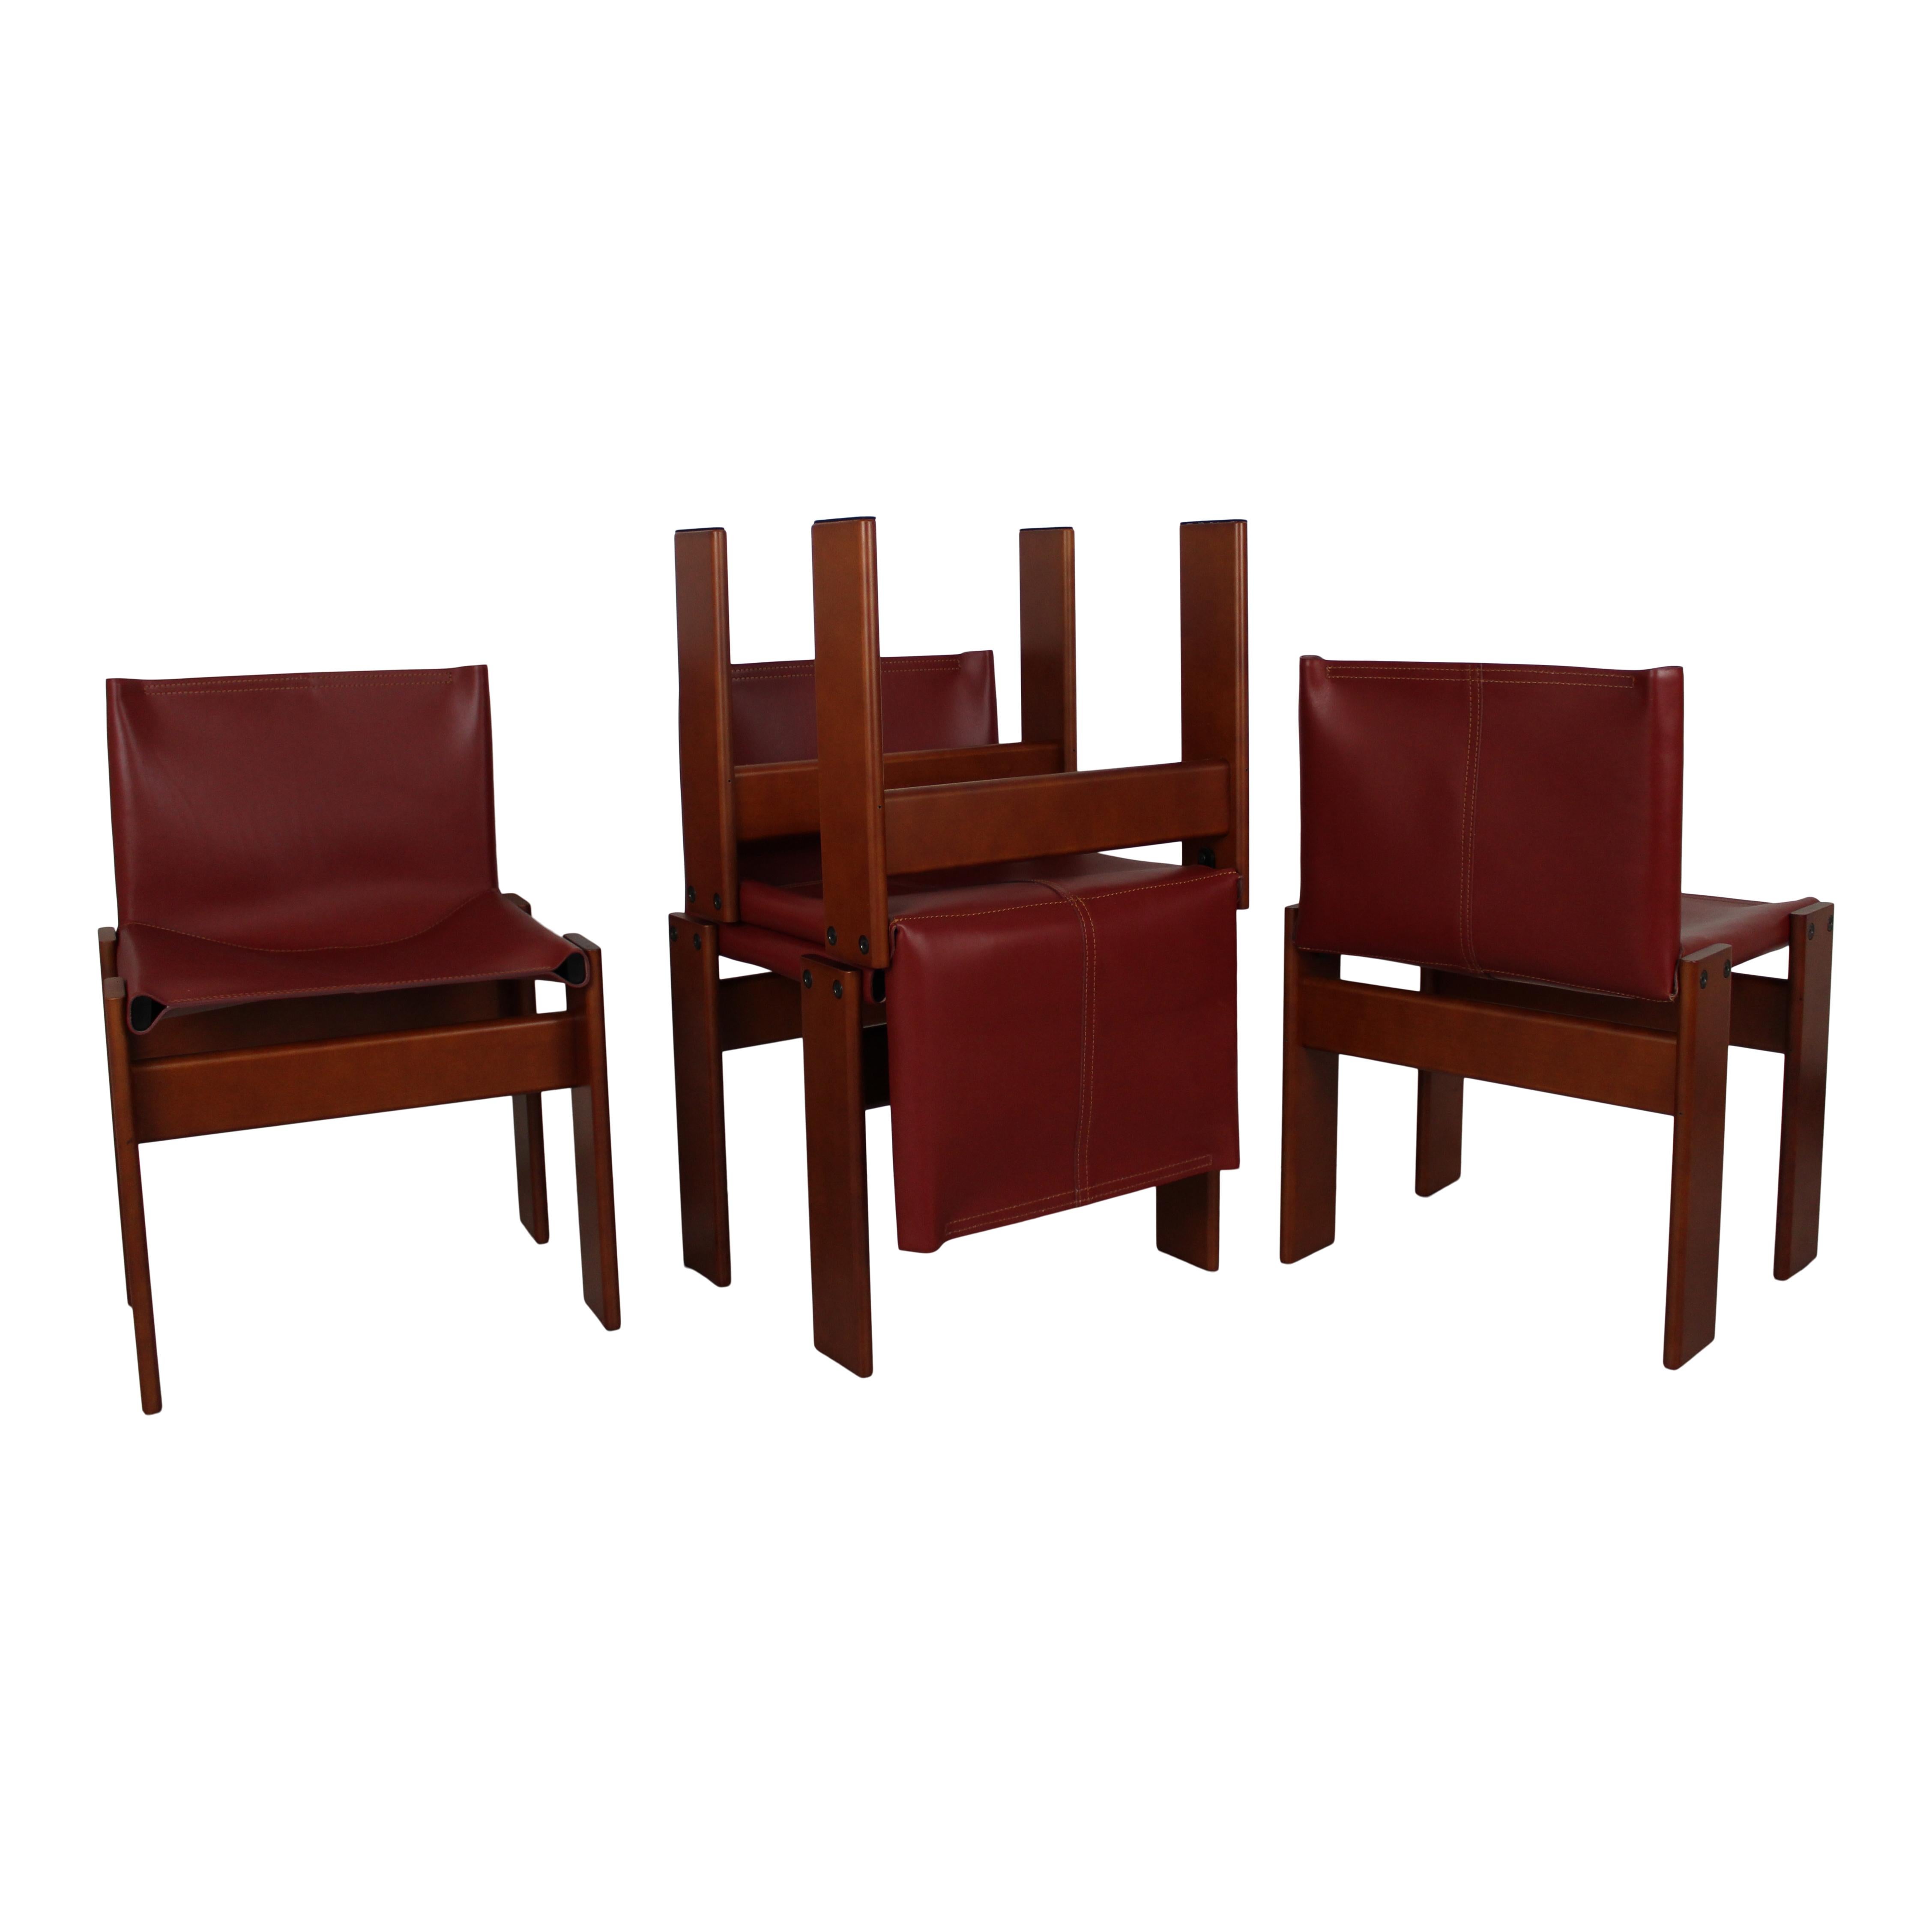 Set of ten “Monk” dining chairs designed by Afra and Tobia Scarpa for Molteni in 1973.
Made of English red leather and walnut.
Fully restored in Italy.

Interesting is the ‘flat’ shape of this chair where the designer has chosen to place the legs